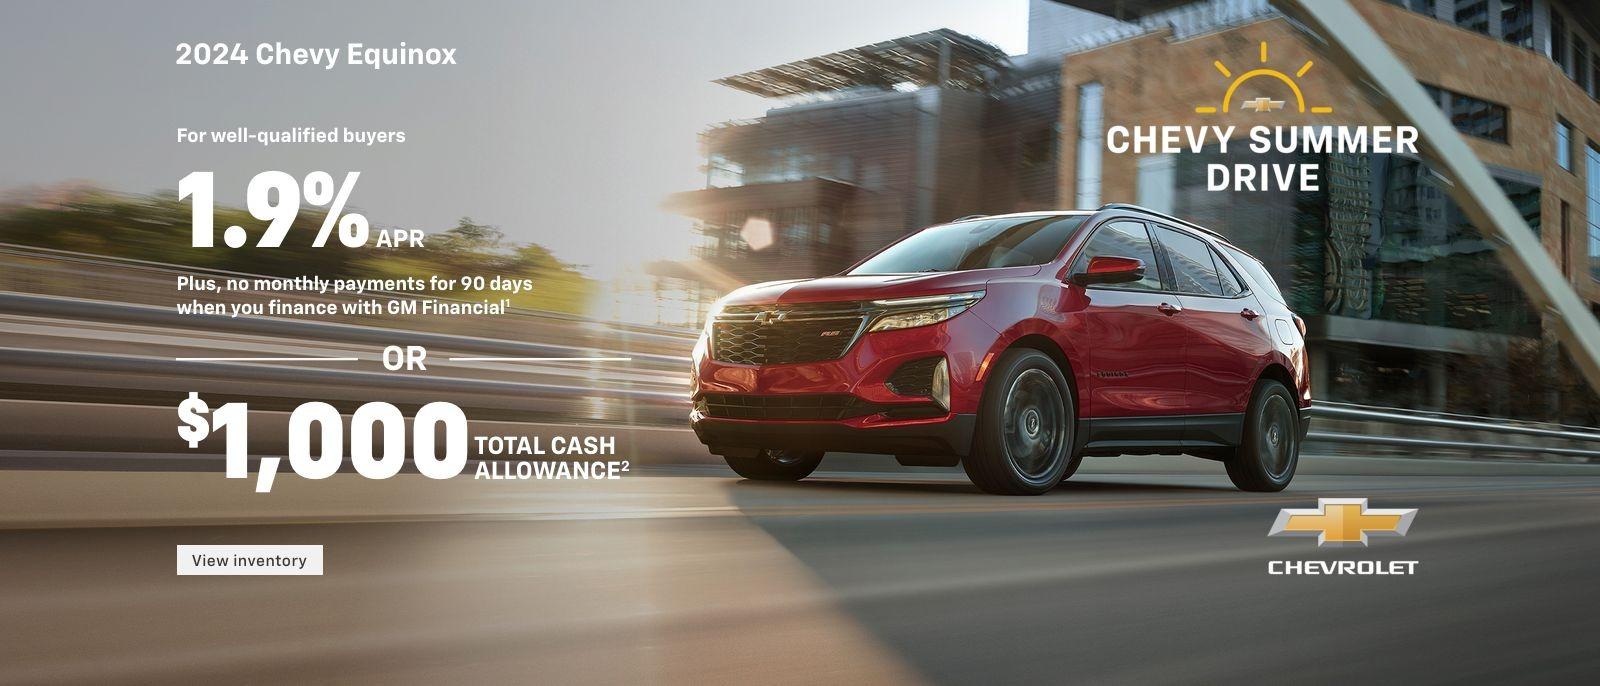 2024 Chevy Equinox. Pack more fun into your summer. For well-qualified buyers 1.9% APR + no monthly payments for 90 days when you finance with GM Financial. Or, $1,000 total cash allowance.